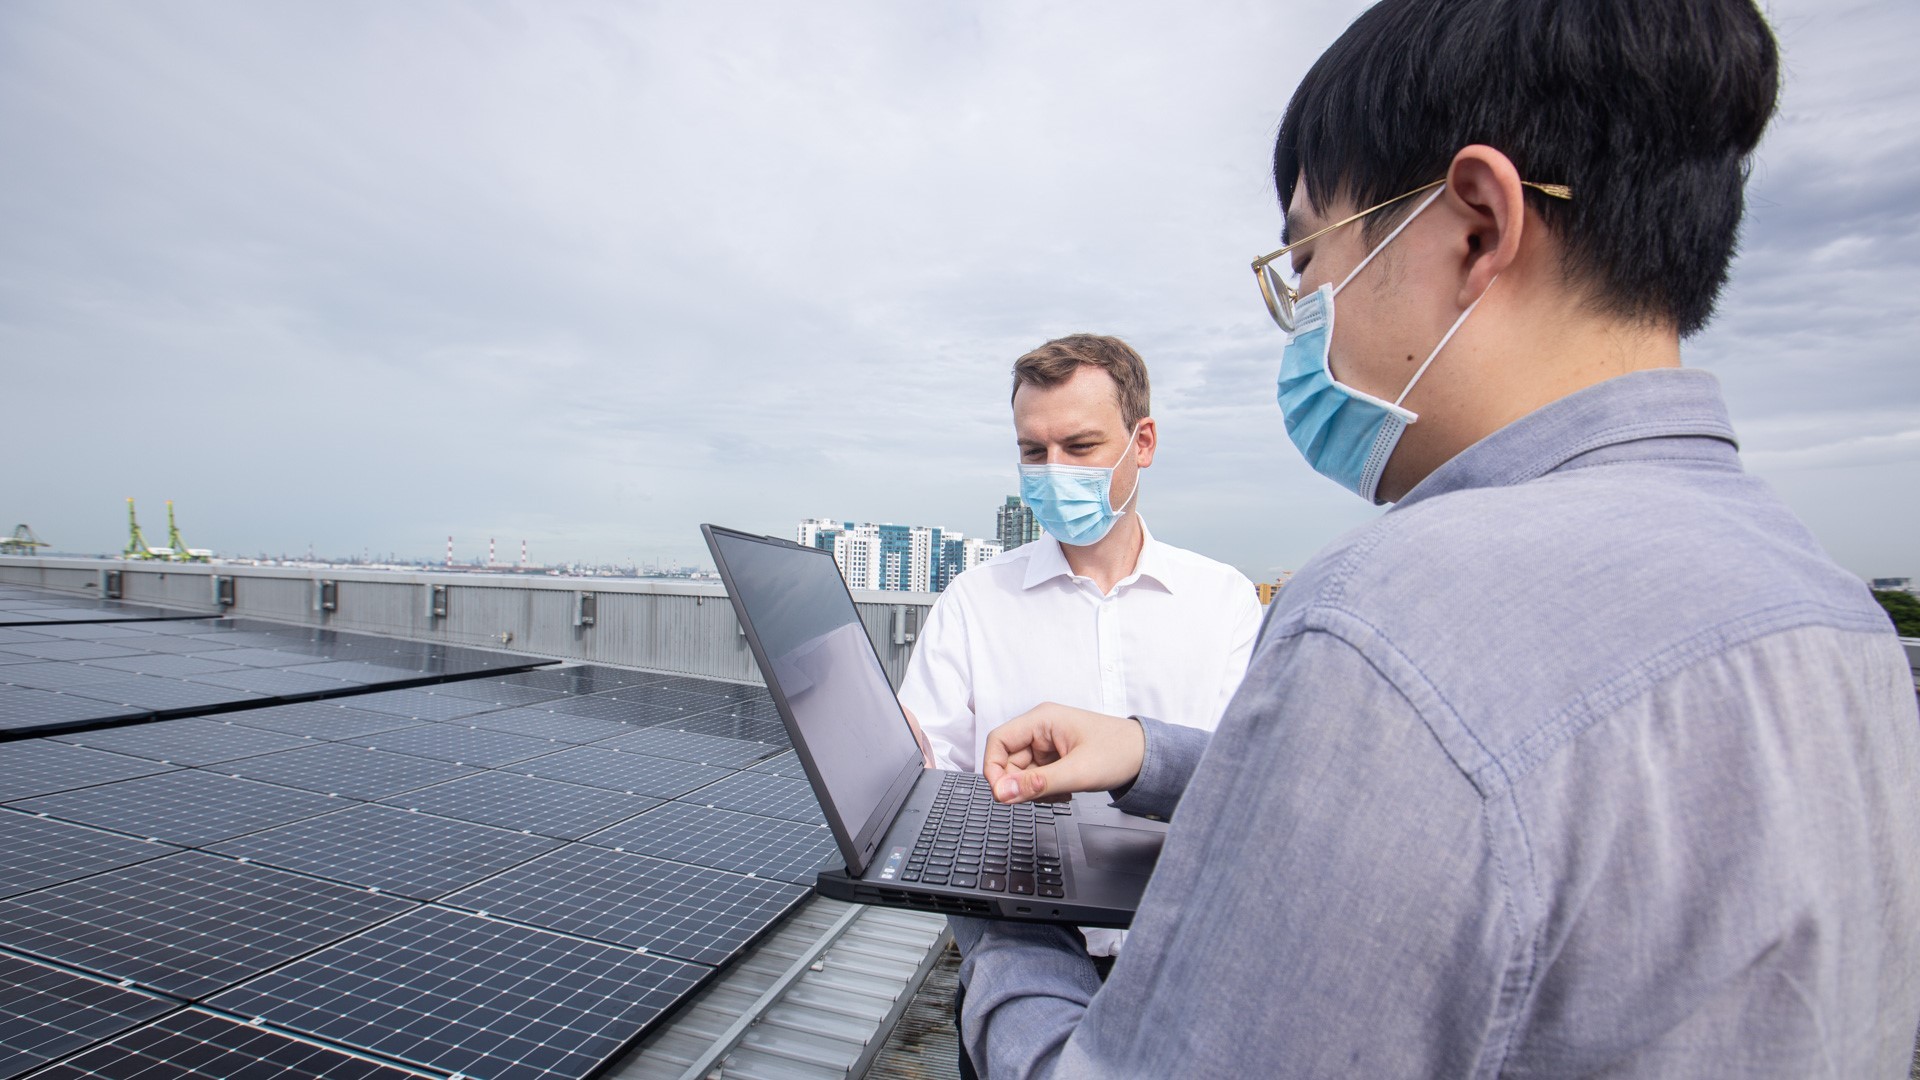 Dr Filip Biljecki (left) and Mr Abraham Noah Wu (right) at the solar roof of the SDE4 building.